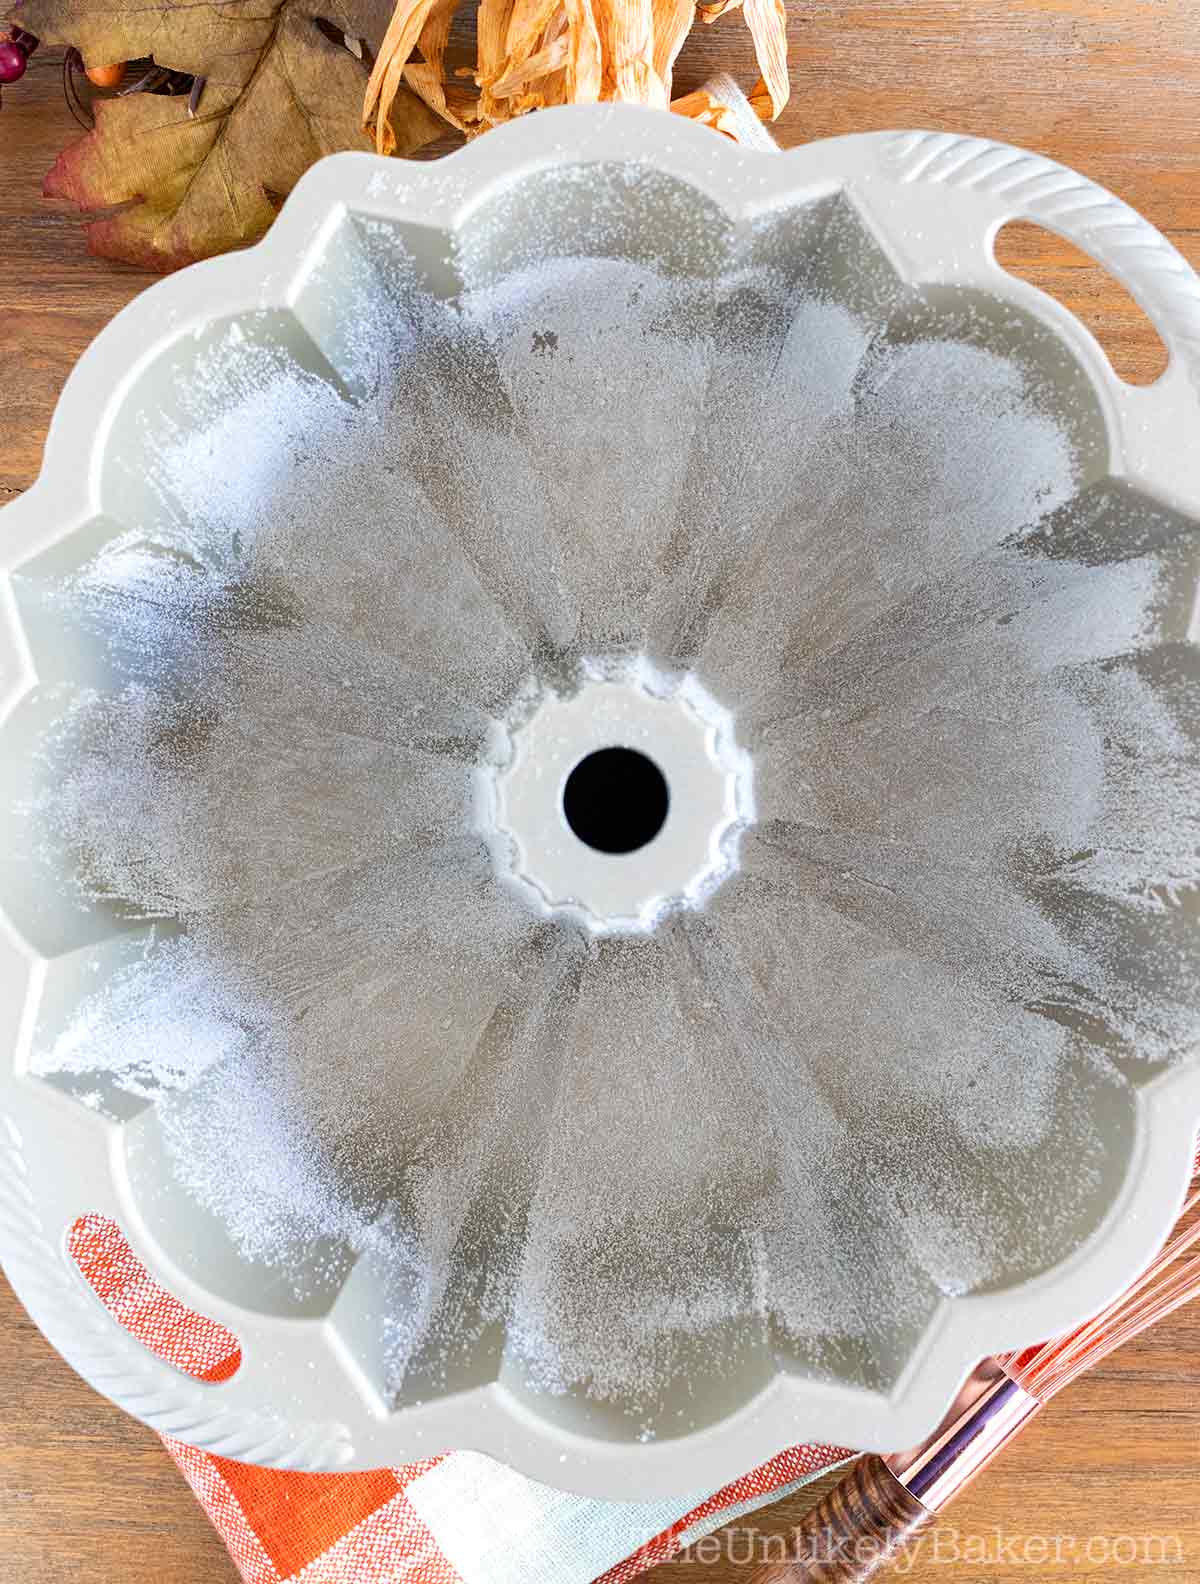 Bundt pan coated with shortening and sugar.